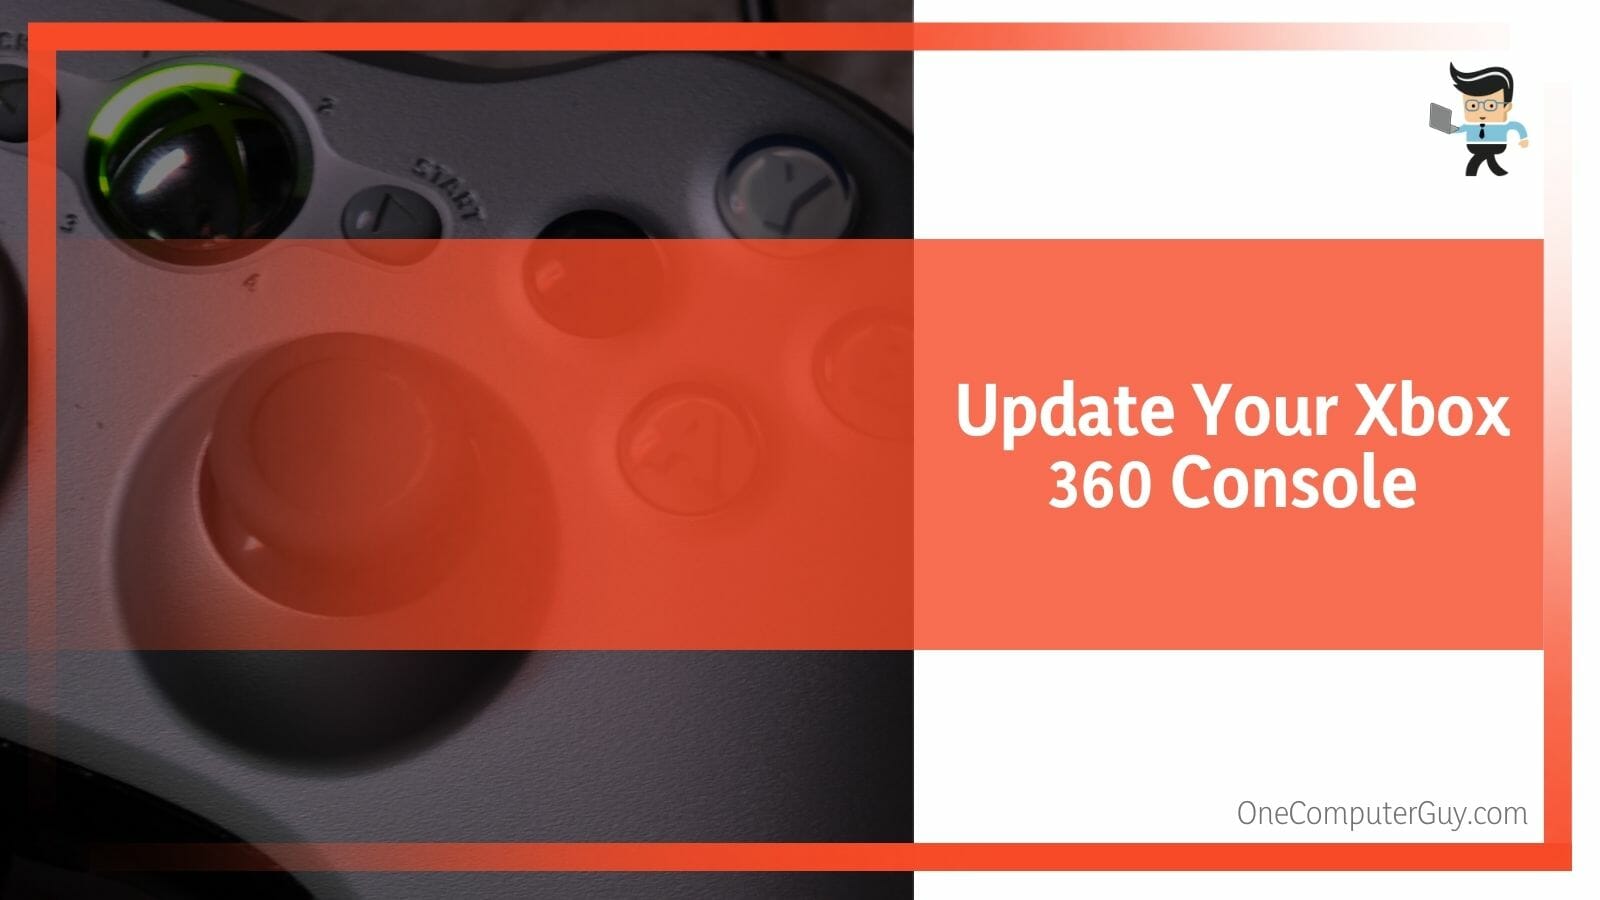 Update Your Xbox 360 Console